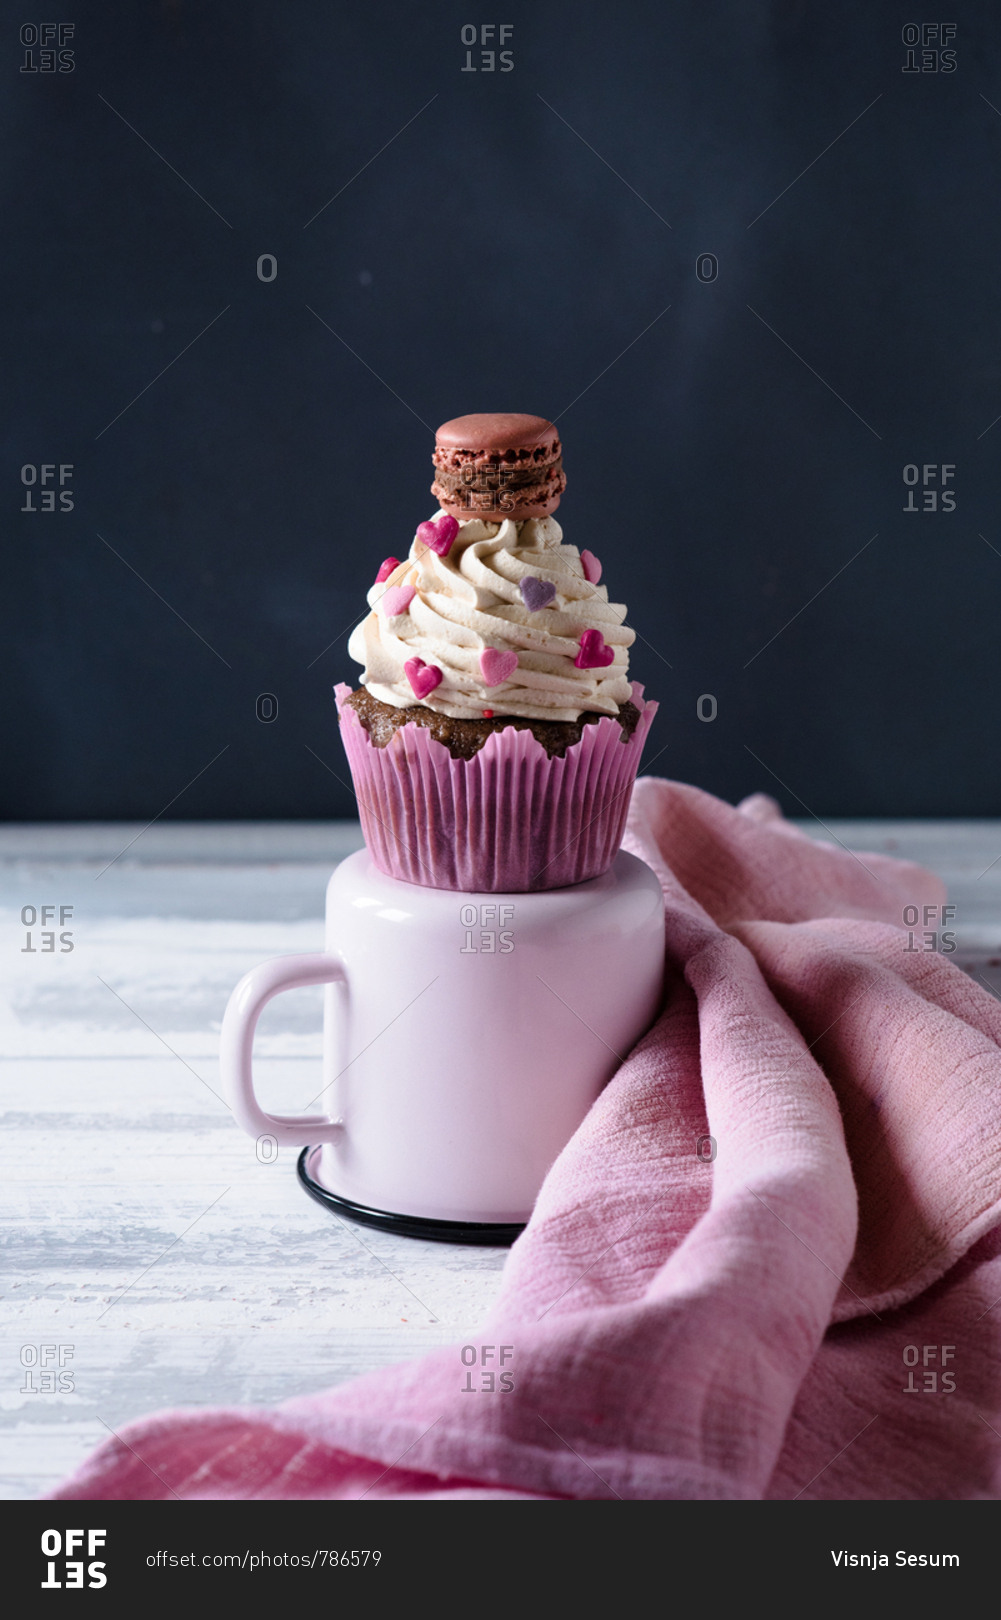 A Valentine's day themed cupcake with cream and hearts decoration